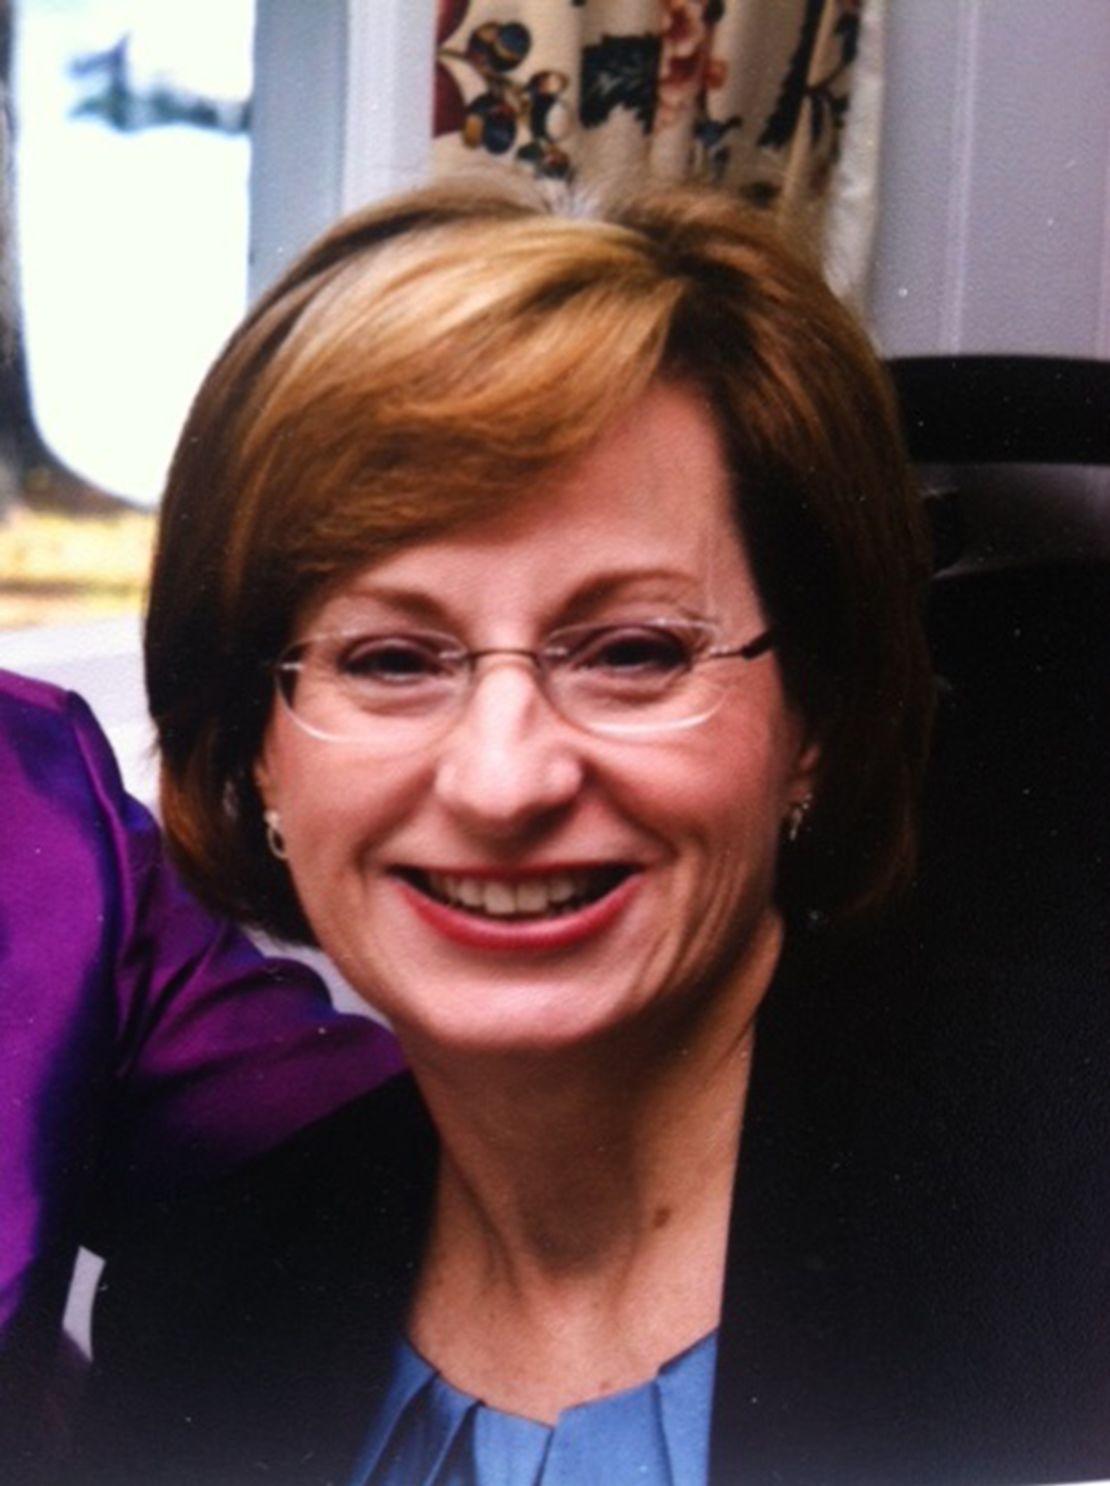 Terri LaManno's family issued a statement saying "she lived for God and the people she loved."